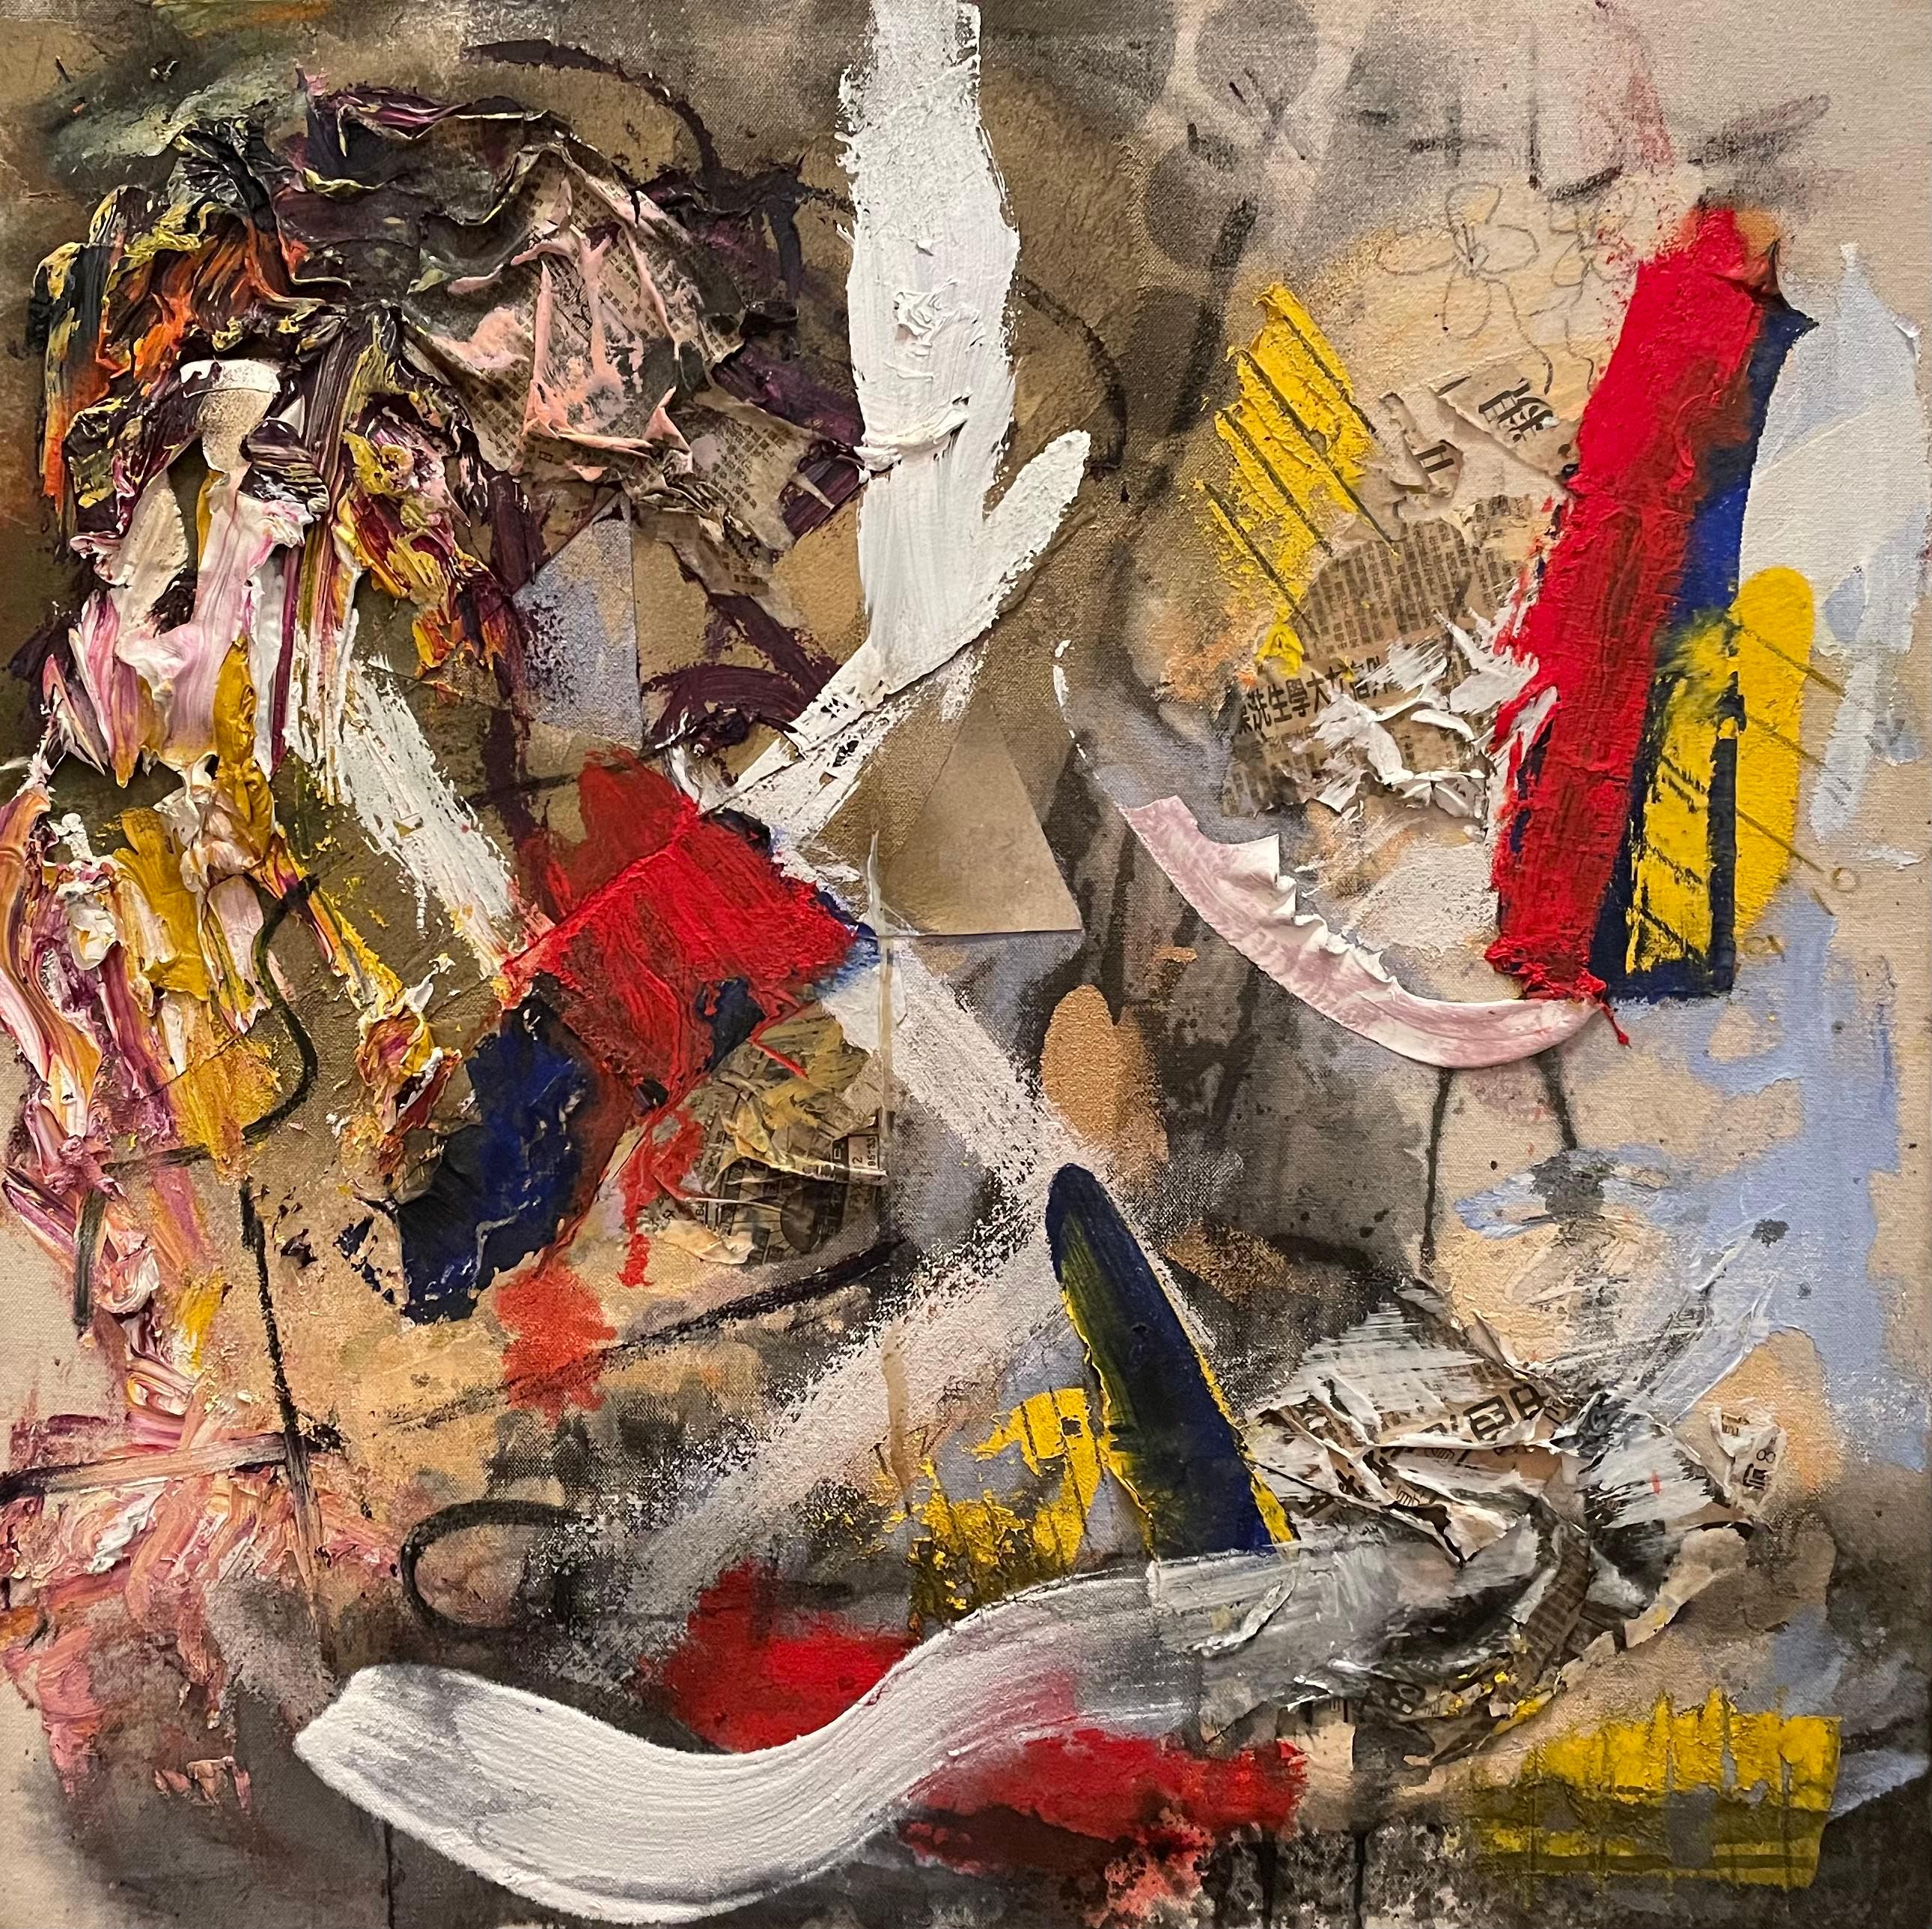 Steven Rehfeld's 24" x 24" abstract mixed media work is a dramatic exploration of texture, color, and form. The tumultuous amalgamation of materials draws viewers into a whirlwind of emotion and motion. Deep shadows and striking highlights play